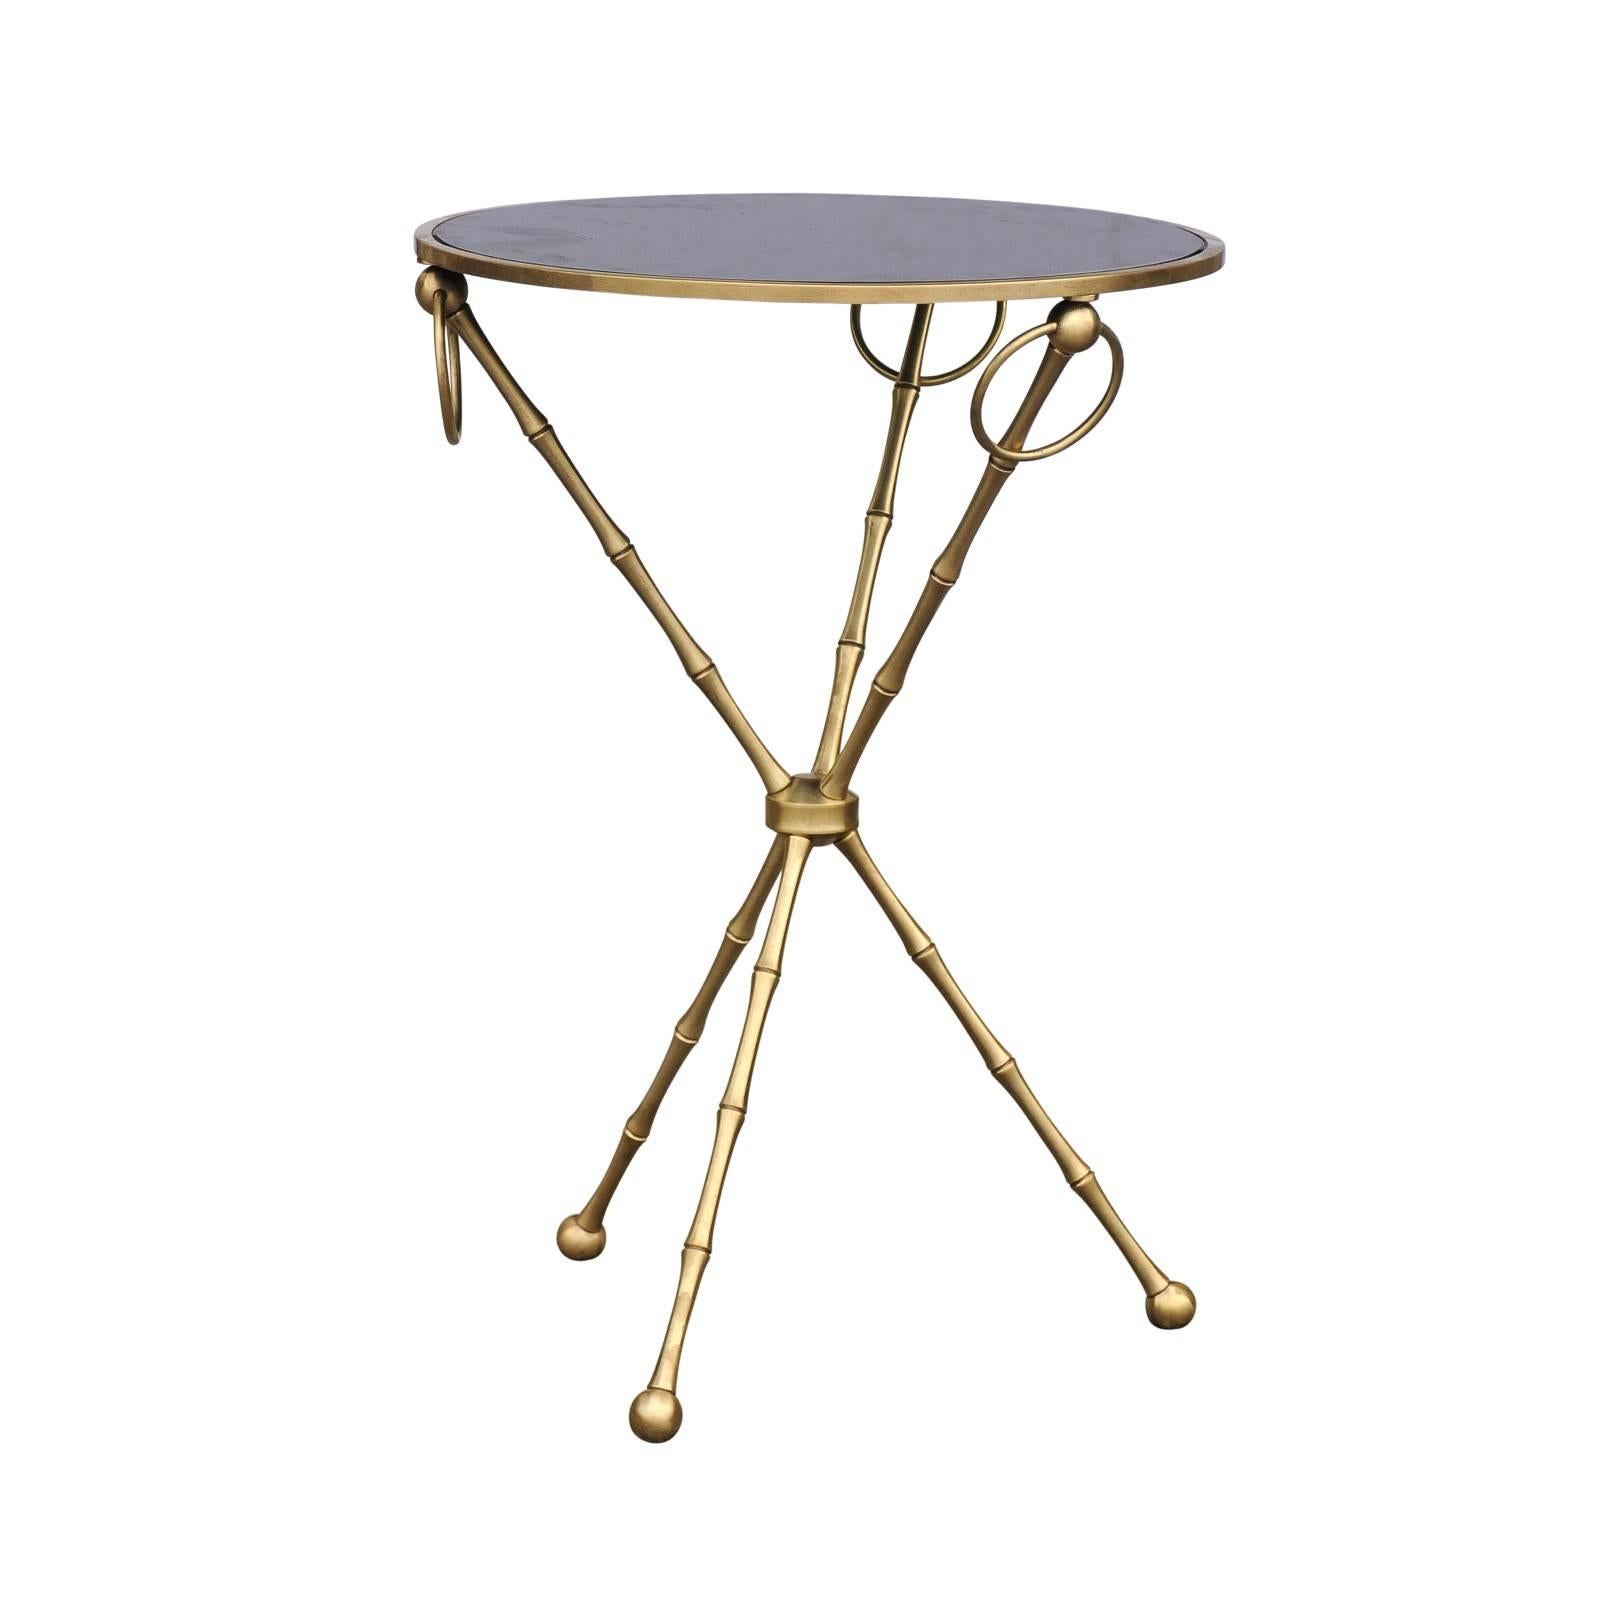 French 1940s Maison Jansen Style Brass and Black Glass Faux-Bamboo Side Table